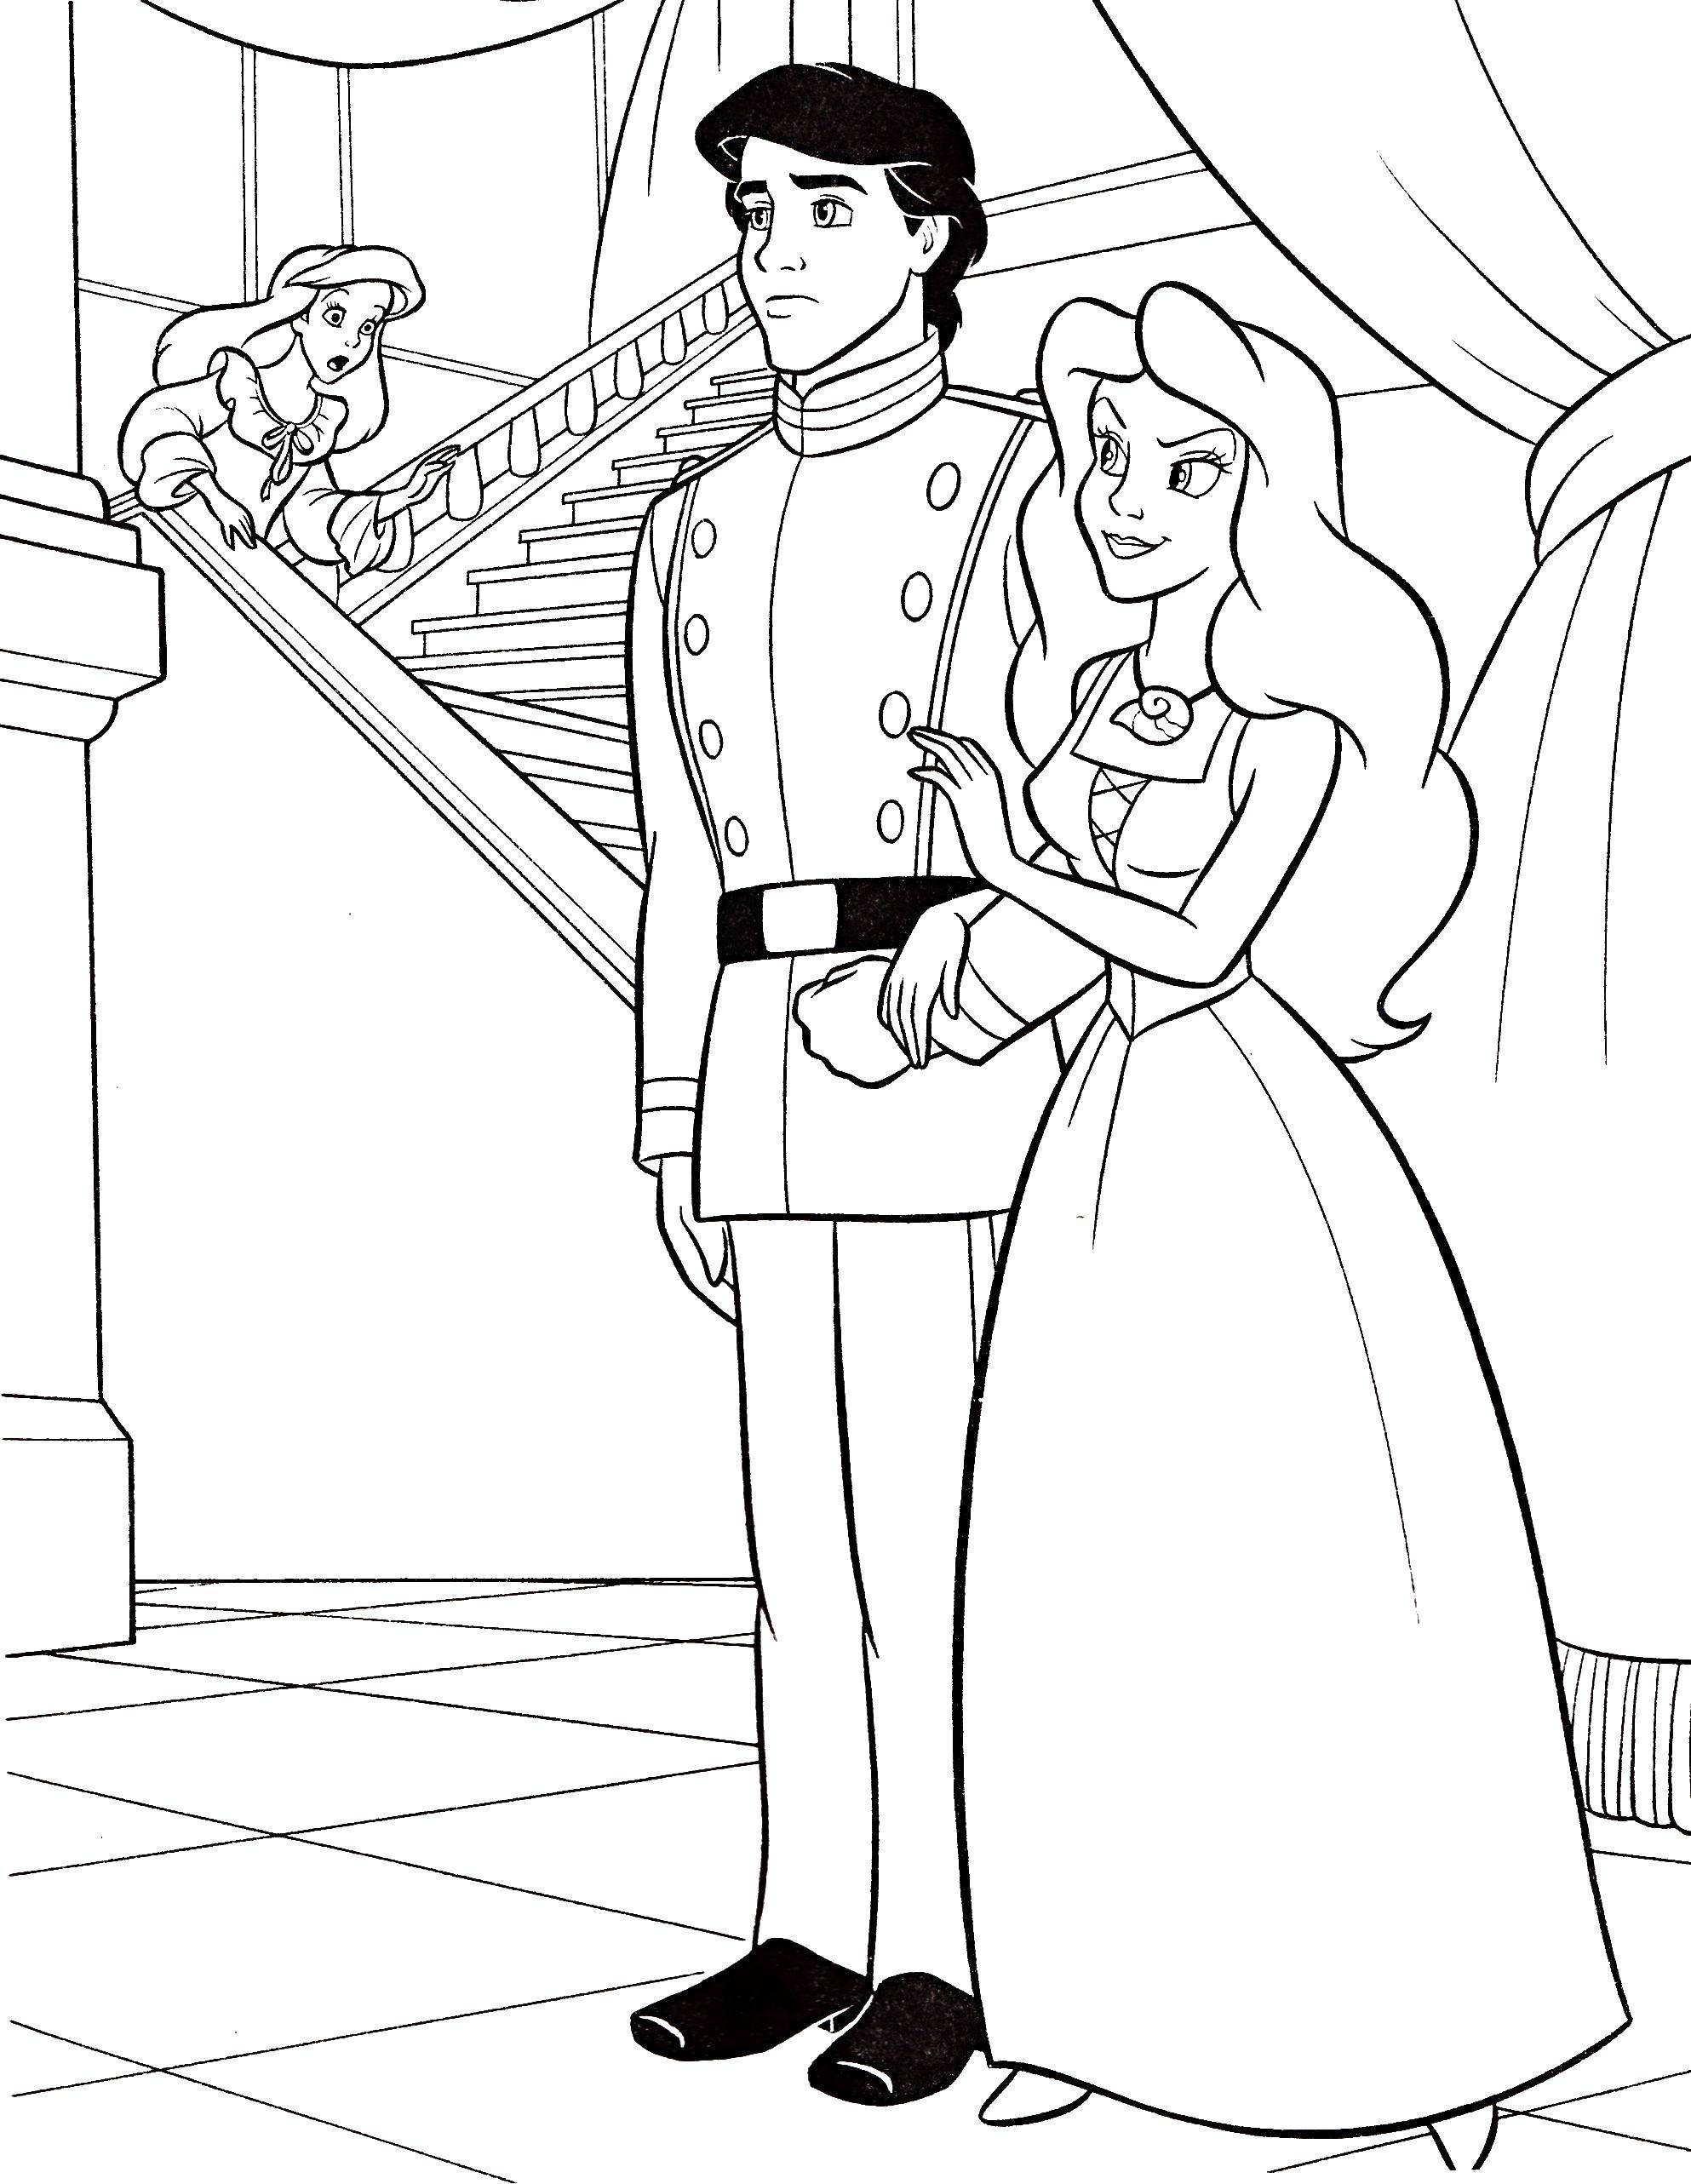 Coloring The evil stepmother and the Prince. Category Disney cartoons. Tags:  the Prince, Cinderella, stepmother.